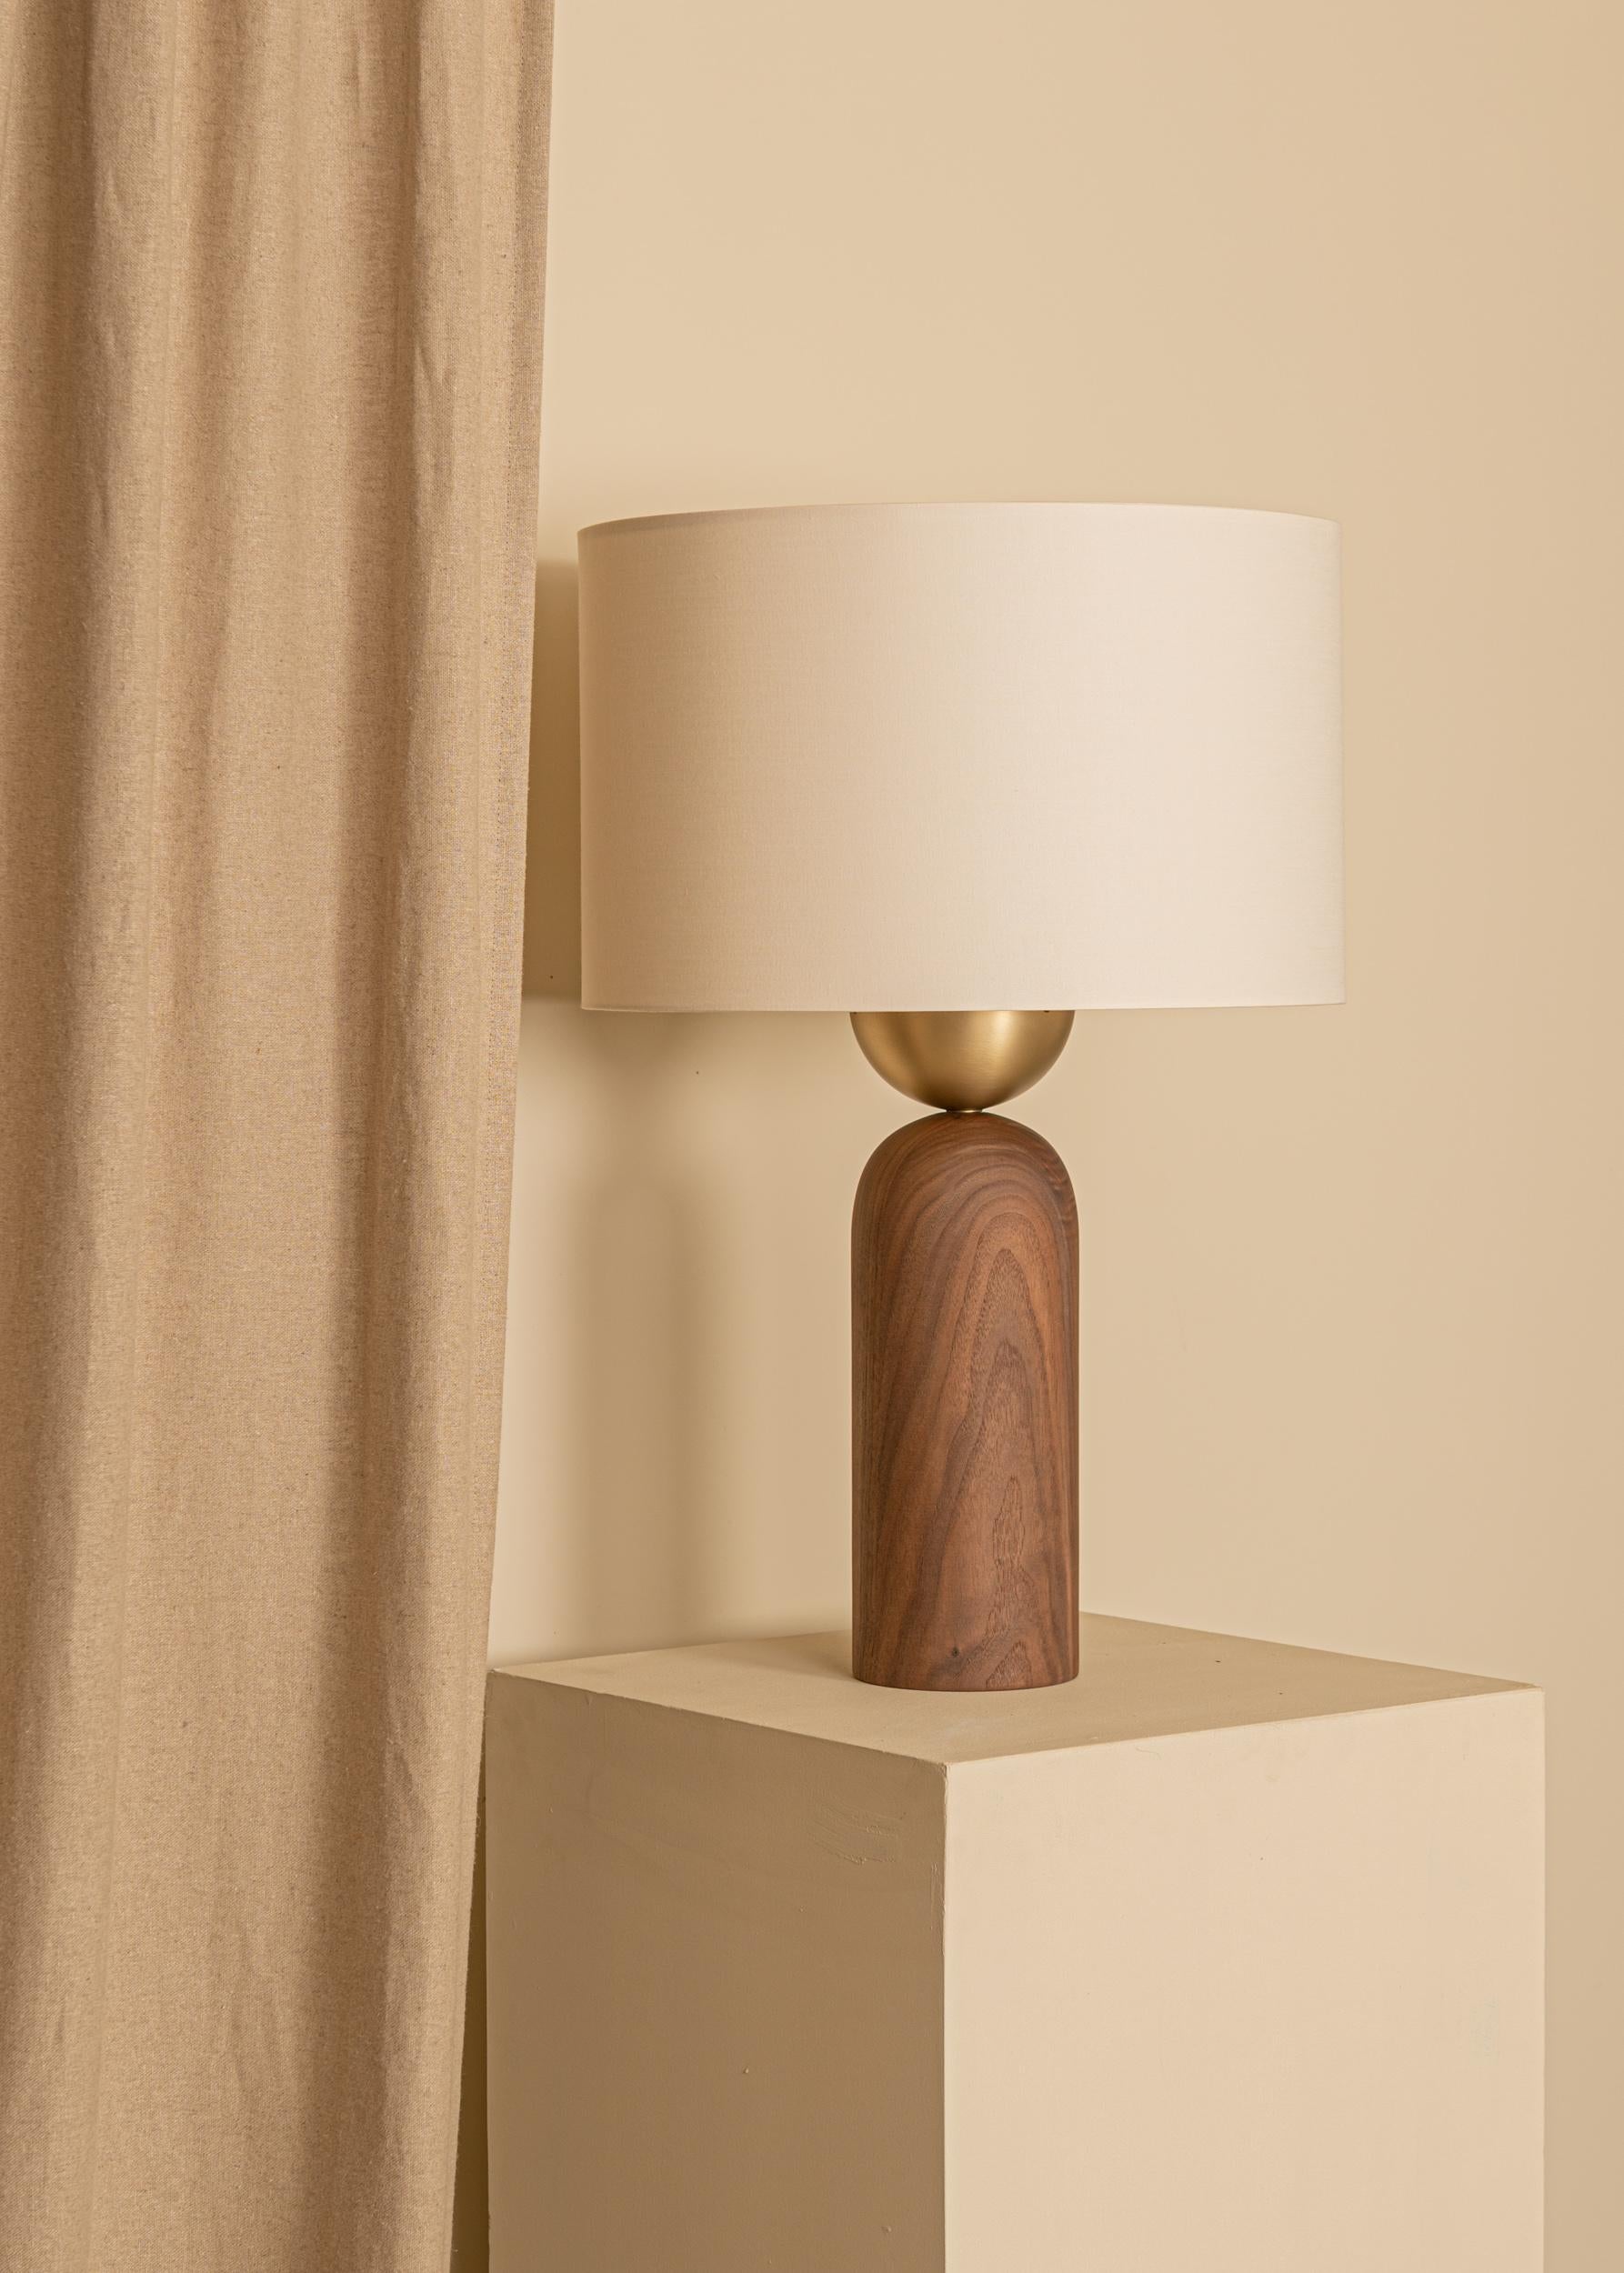 Walnut Peona Table Lamp by Simone & Marcel
Dimensions: Ø 40 x H 61 cm.
Materials: Brass, cotton and walnut.

Also available in different marble, wood and alabaster options and finishes. Custom options available on request. Please contact us. 

All